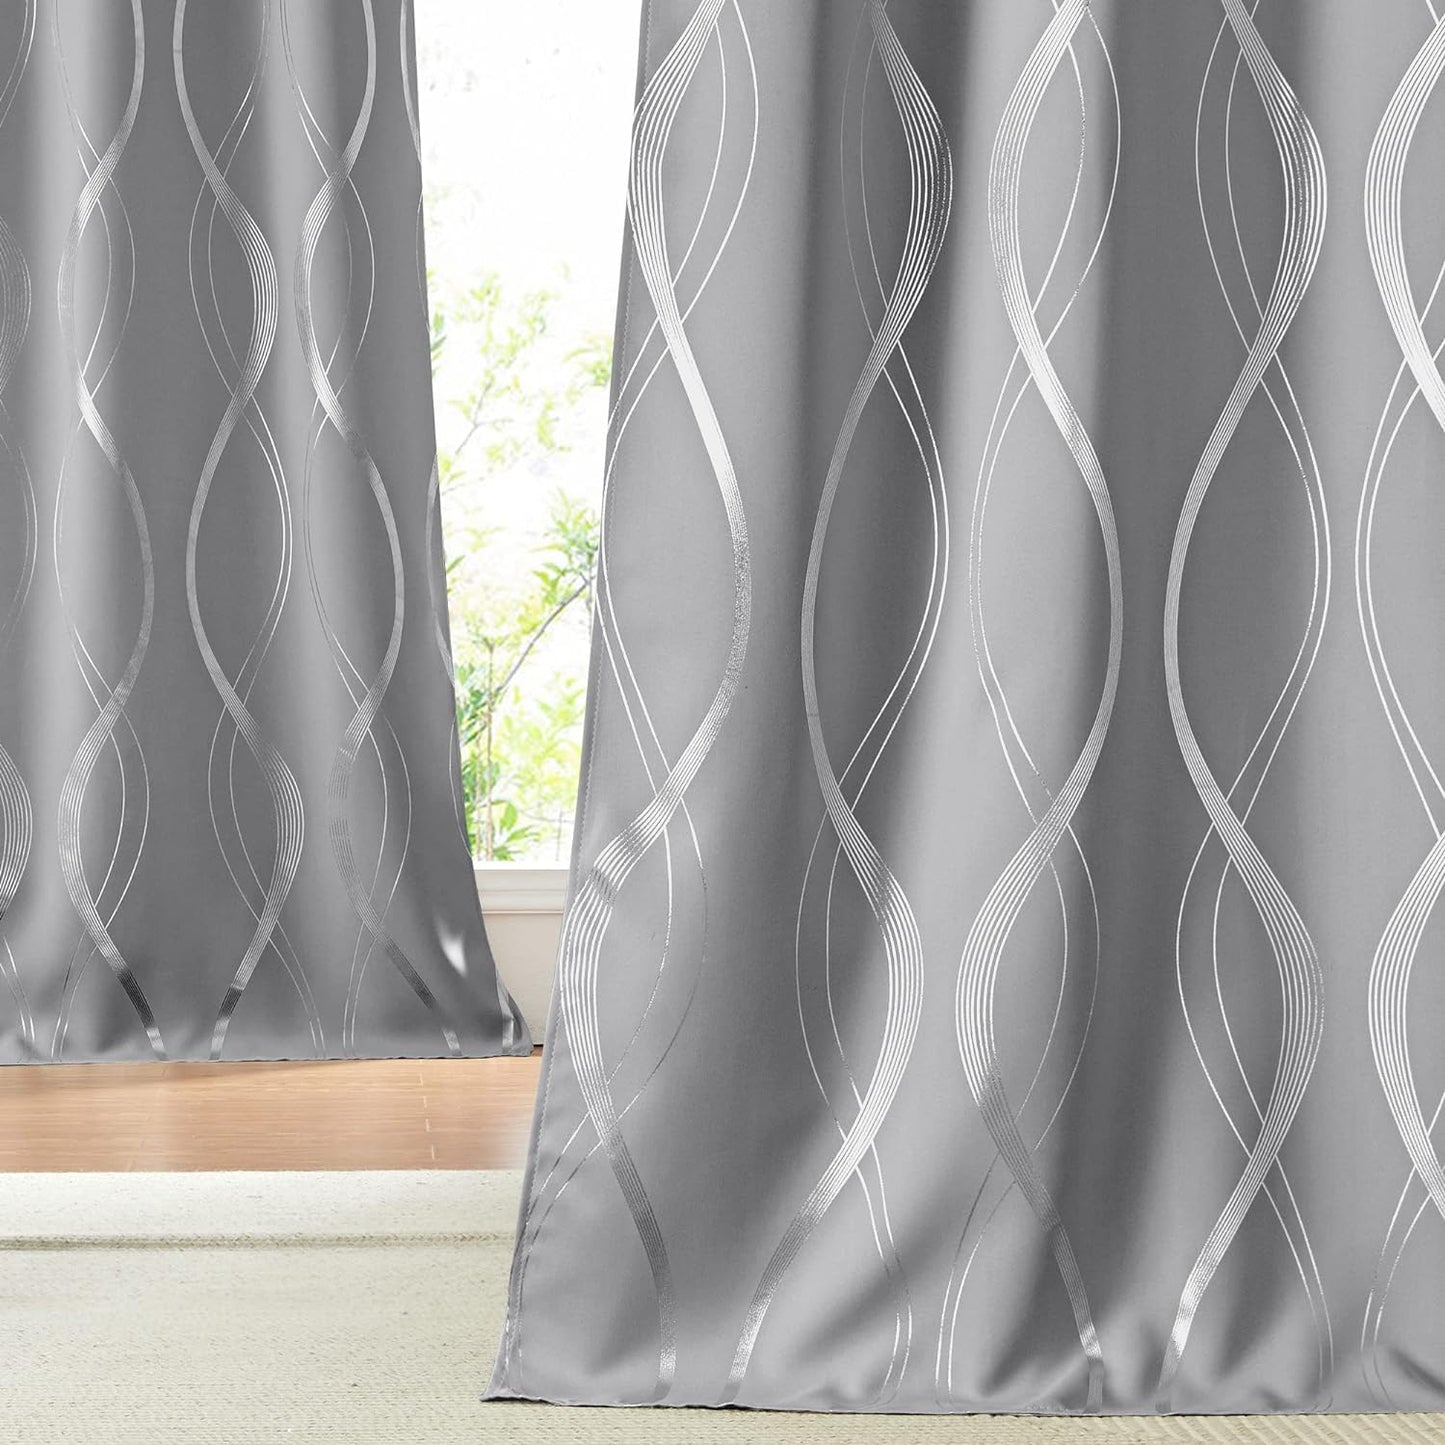 NICETOWN Grey Blackout Curtains 84 Inch Length 2 Panels Set for Bedroom/Living Room, Noise Reducing Thermal Insulated Wave Line Foil Print Drapes for Patio Sliding Glass Door (52 X 84, Gray)  NICETOWN Silver Grey 42"W X 84"L 